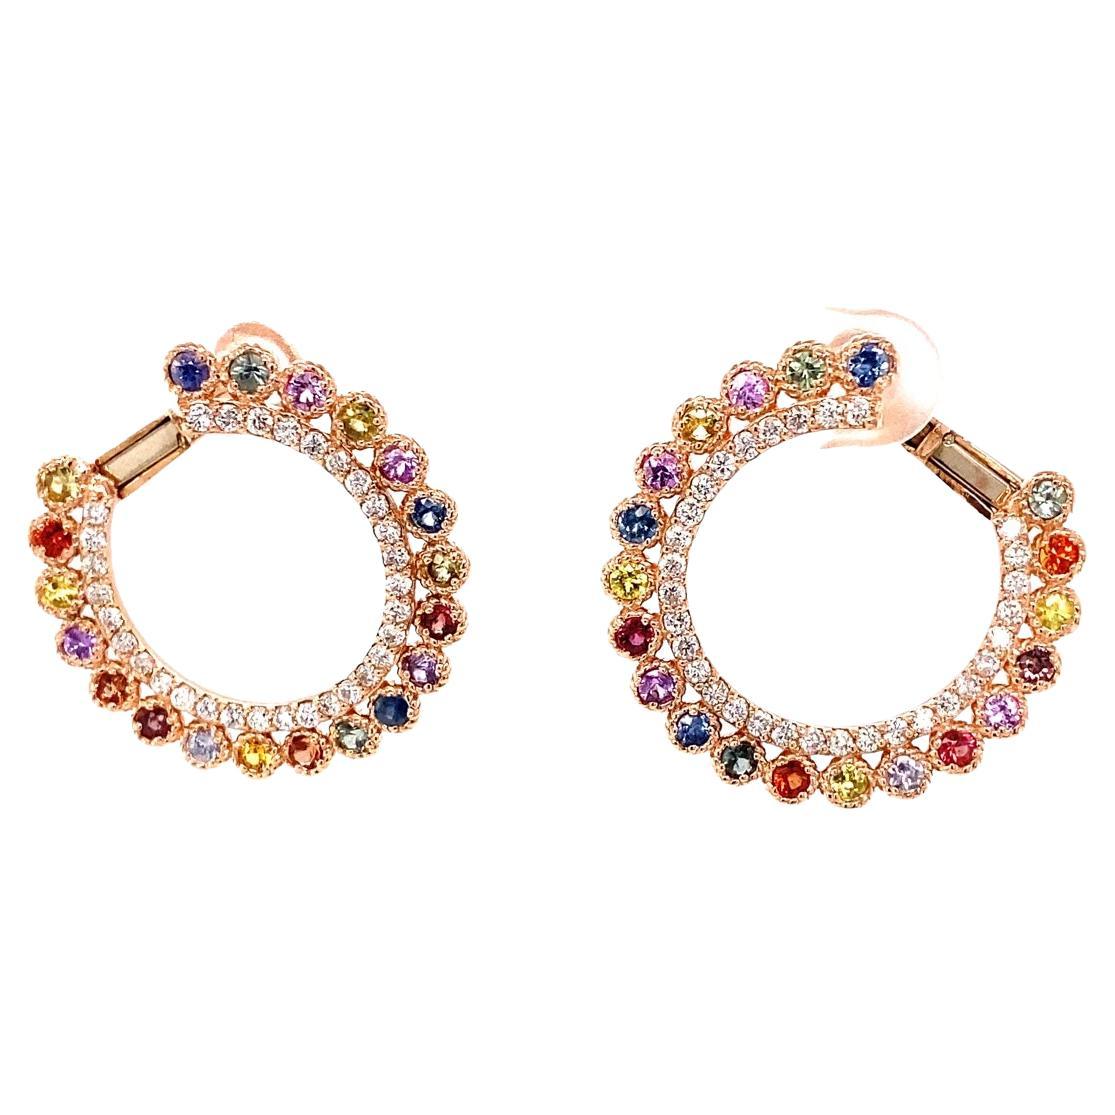 3.44 Carat Multi-Color Sapphire Diamond Rose Gold Earrings
Beautiful and Unique Earrings 

Item Specs:

40 Multi-Colored Natural Sapphires is2.55 carats
64 Round Cut Natural Diamonds is 0.89 carats
Clarity: SI2, Color: F
Total Carat Weight is 3.44